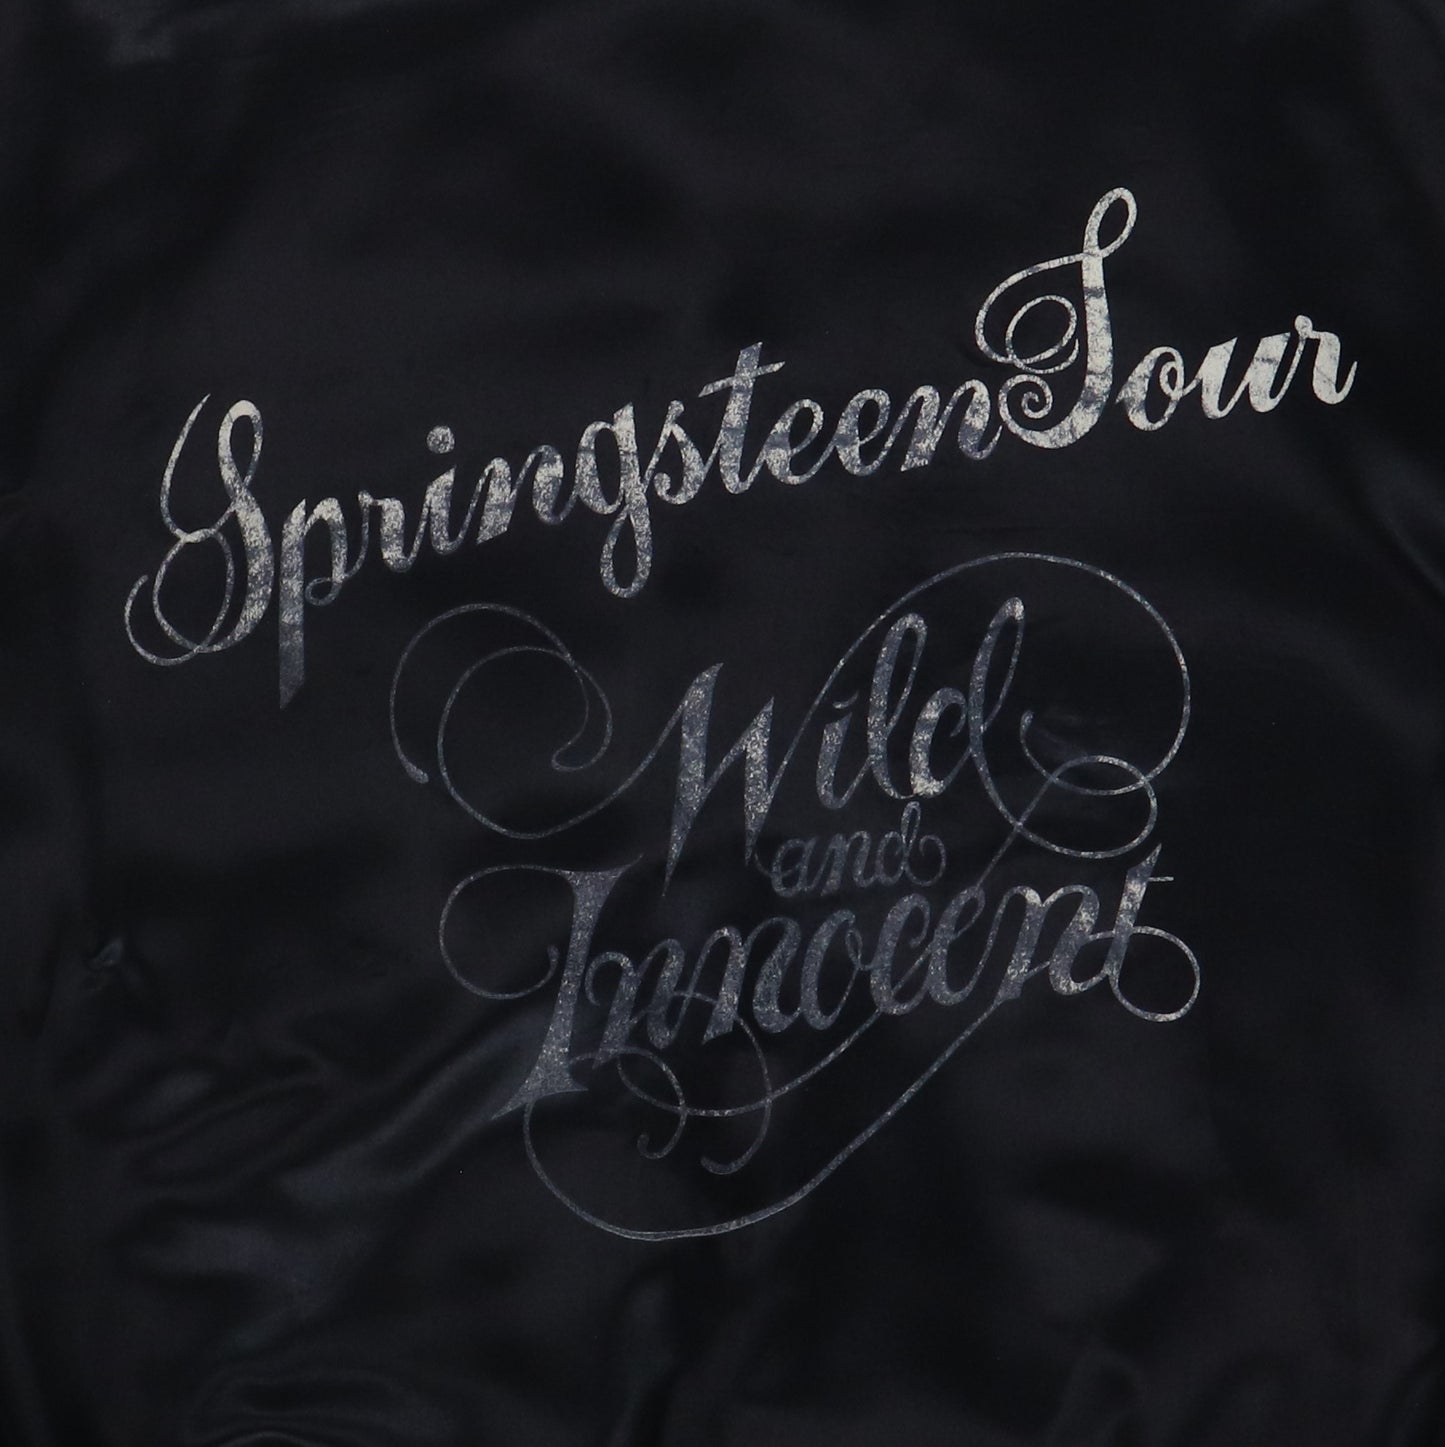 1973 Bruce Springsteen Wild And Innocent Jacket